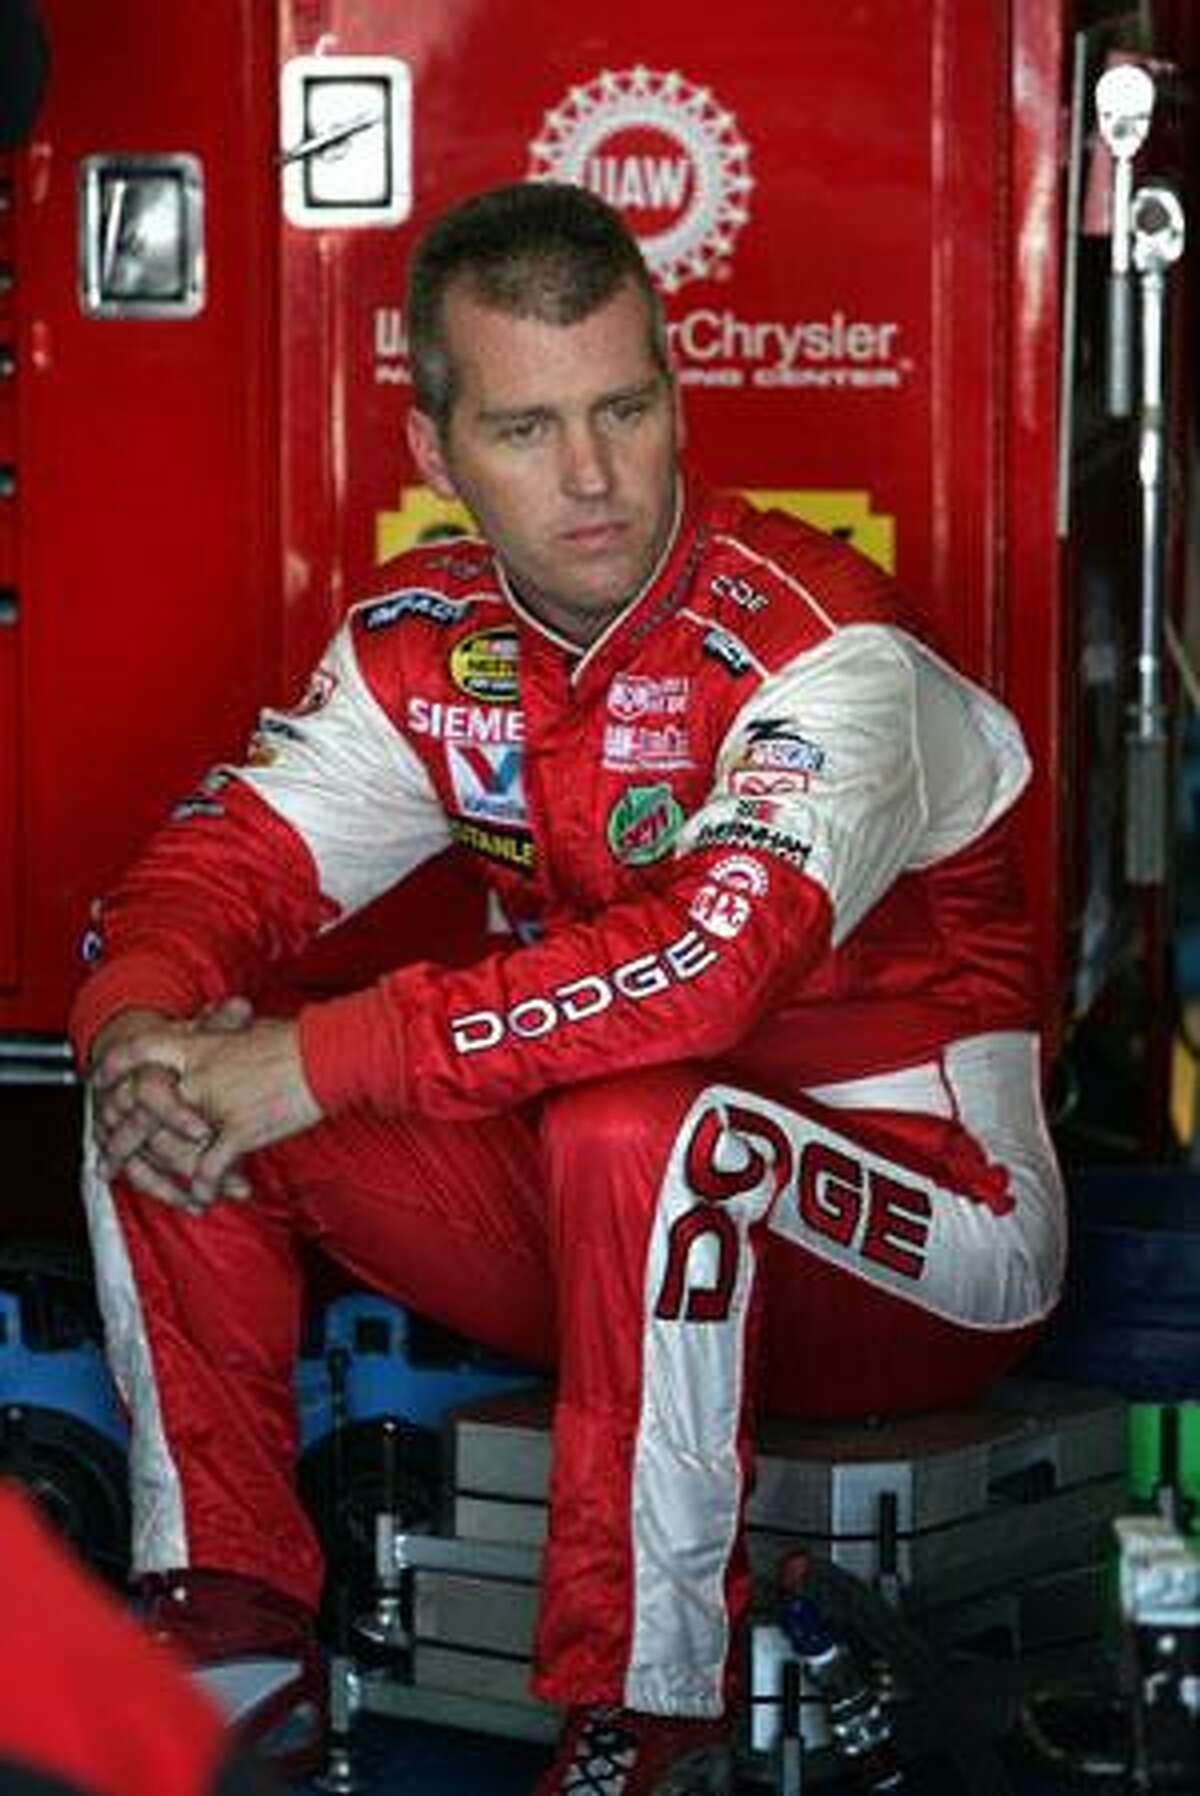 AP In this May 26, 2005, file photo, Jeremy Mayfield sits in the garage during practice at Lowe's Motor Speedway in Concord, N.C. Mayfield is back under suspension for a failed random drug test after an appeals court ruled in NASCAR's favor Friday, issuing a stay on the injunction that gave the driver the right to return to the race track.